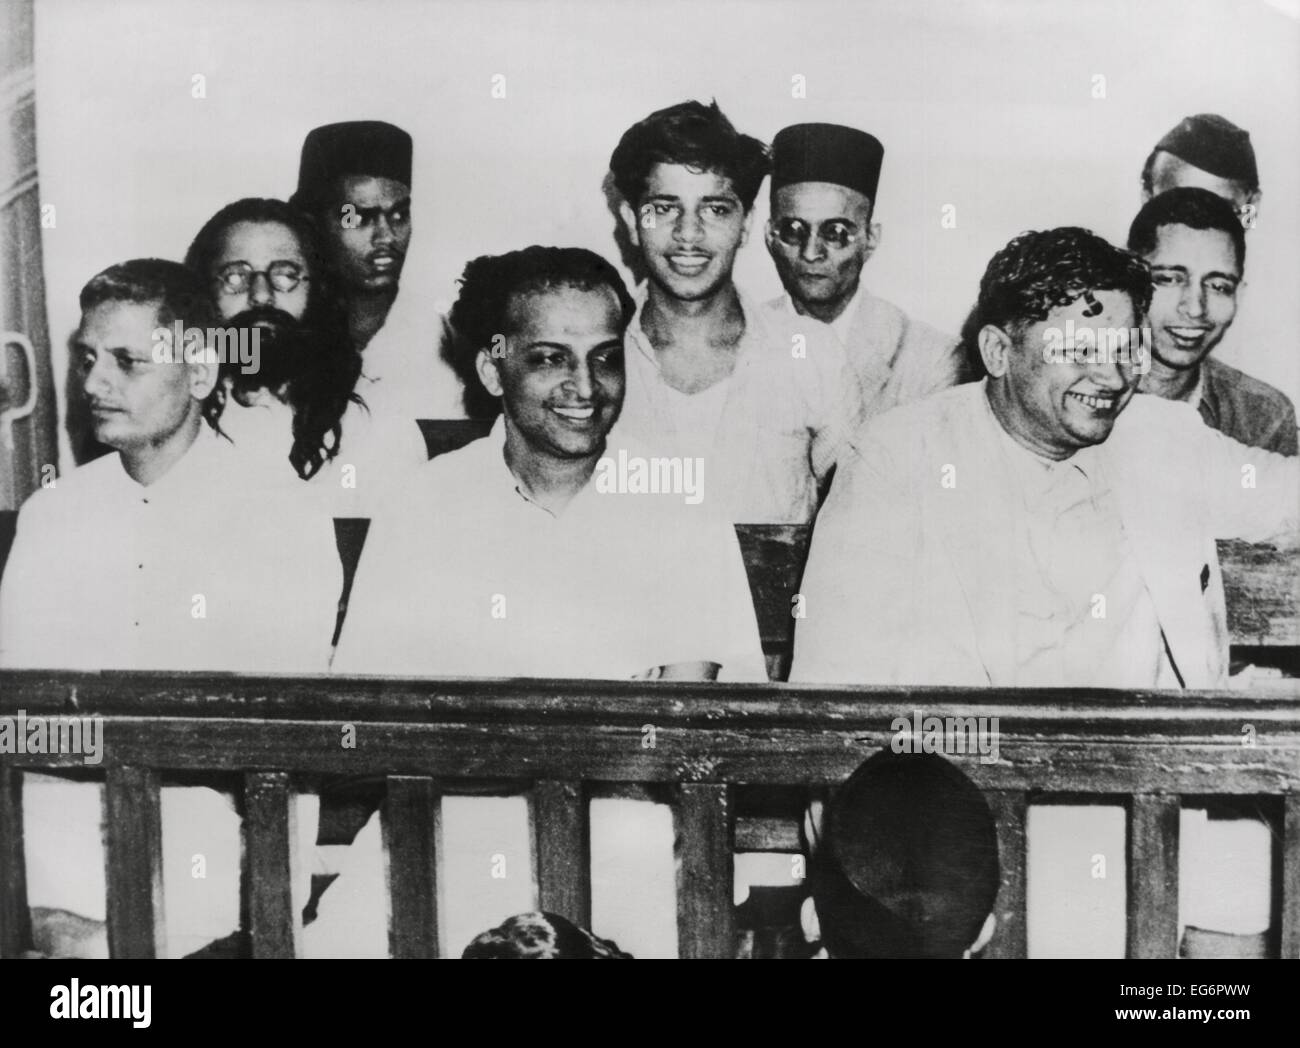 The men accused in the murder of Mohandas Gandhi. Of the group on trial, Nathuram Godse and Narayan Apte were sentenced to Stock Photo